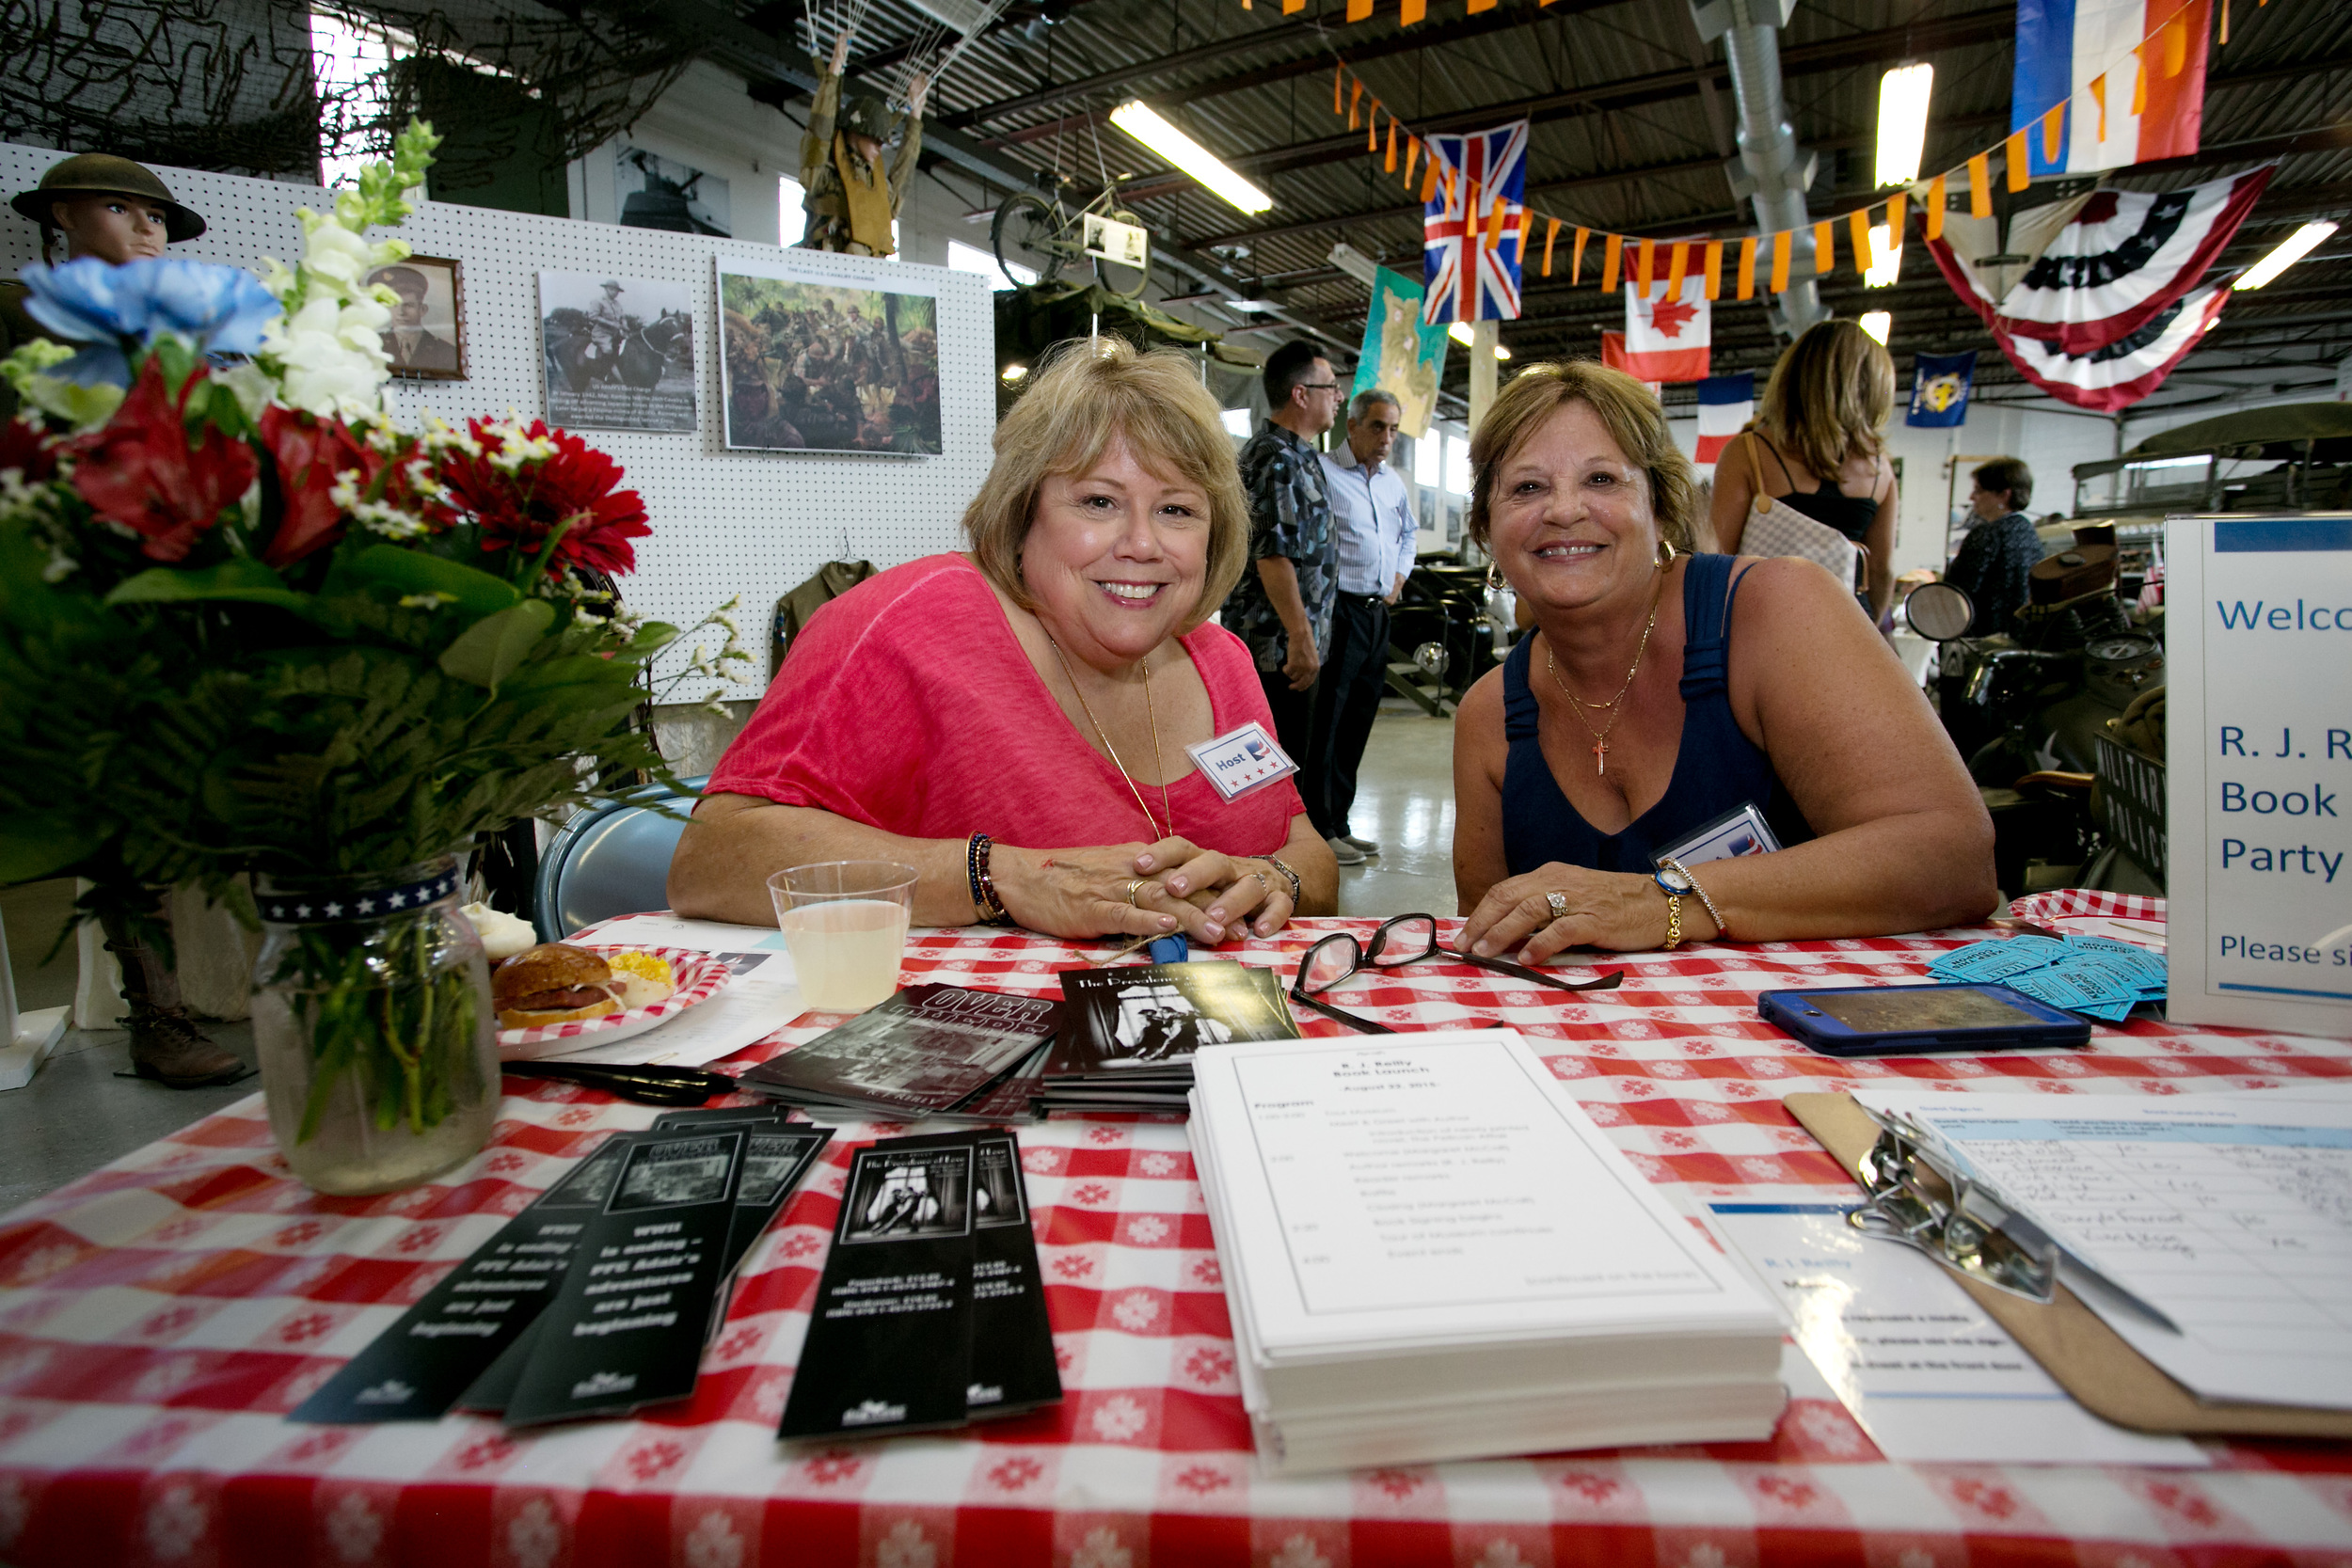 Marlene Heitmanis w Donna Fuga at Sign in Table.jpg